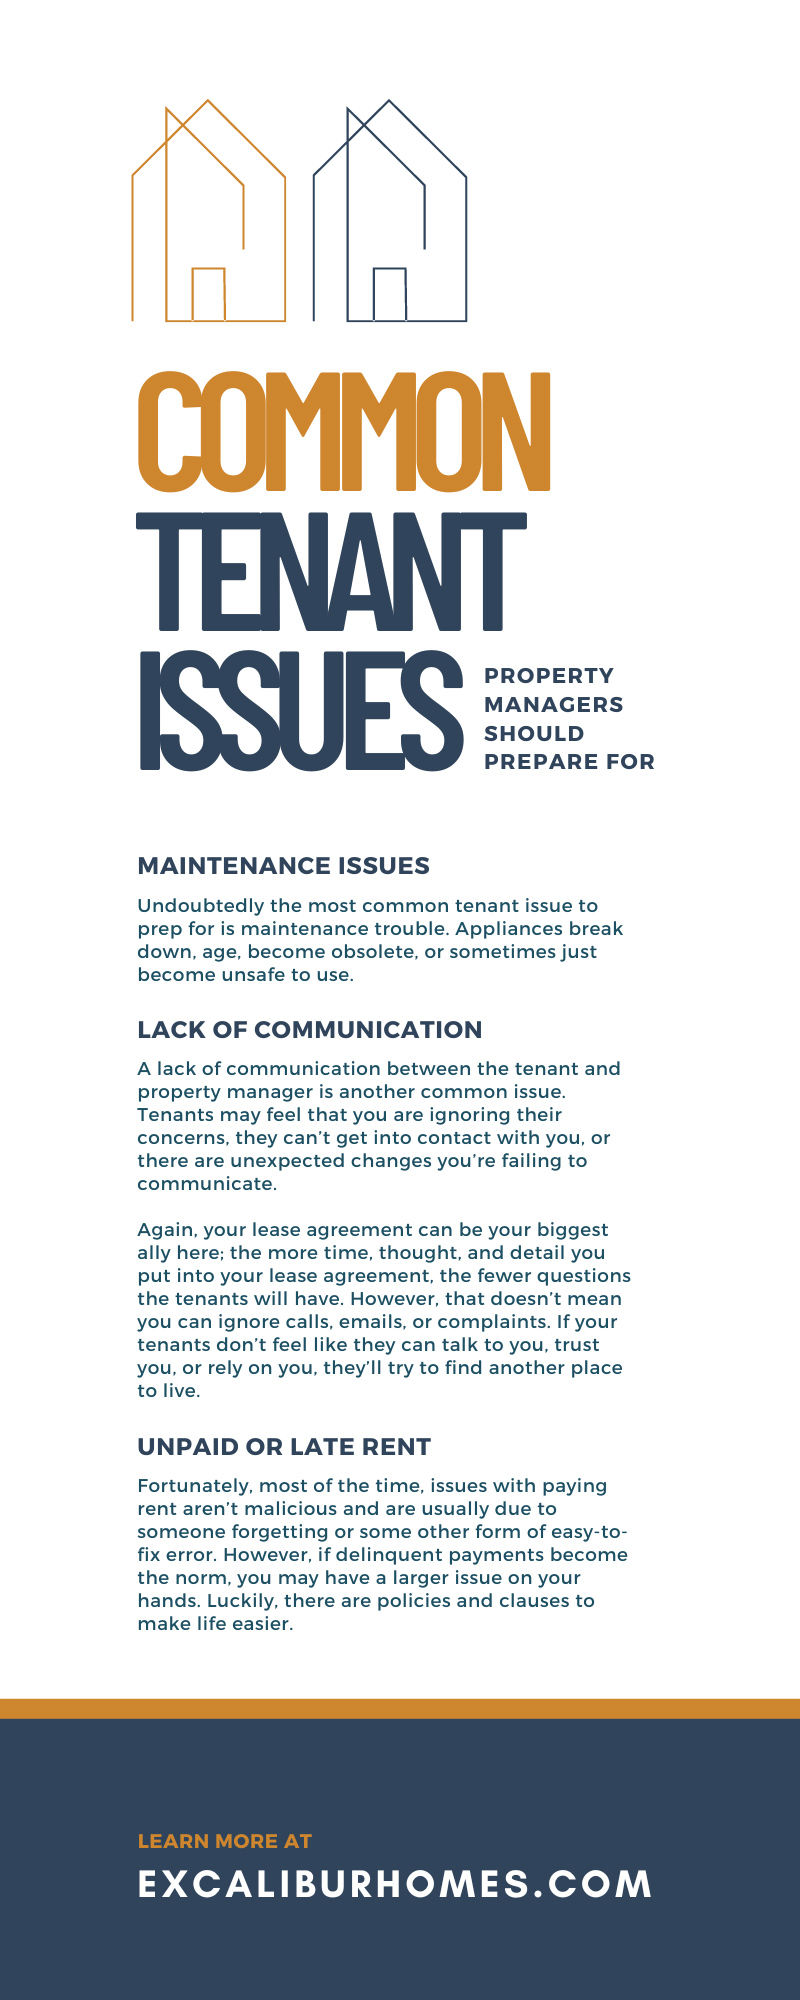 Common Tenant Issues Property Managers Should Prepare For